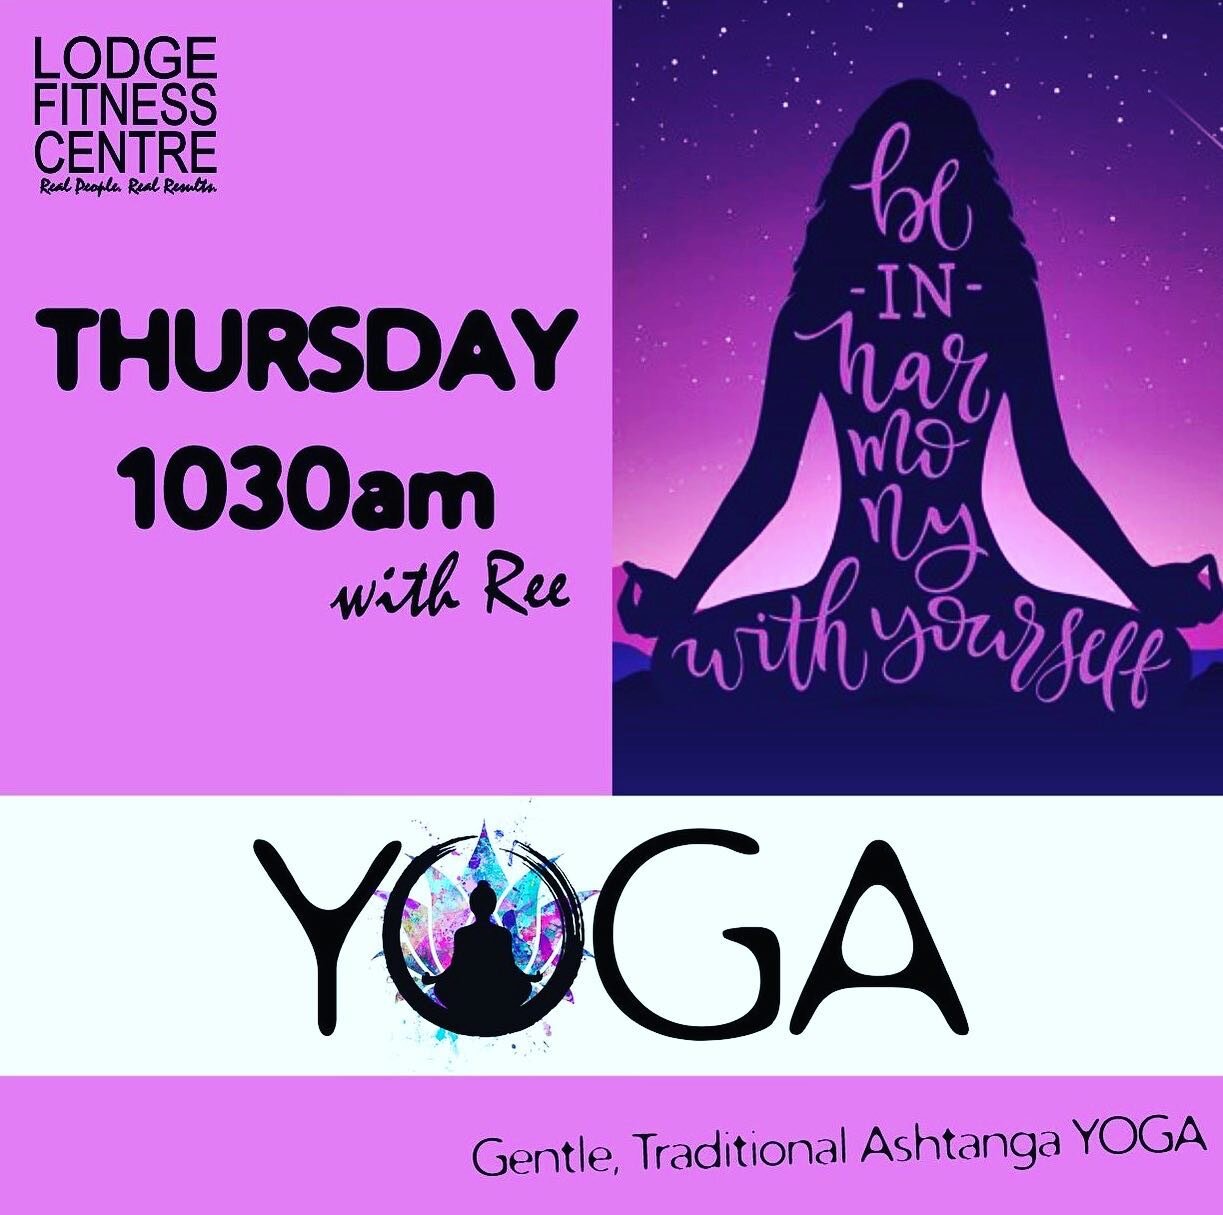 Have you tried YOGA at The Lodge? Join Ree for a gentle and traditional Ashtanga session. An hour dedicated to just you. BOOK NOW on the app 💜